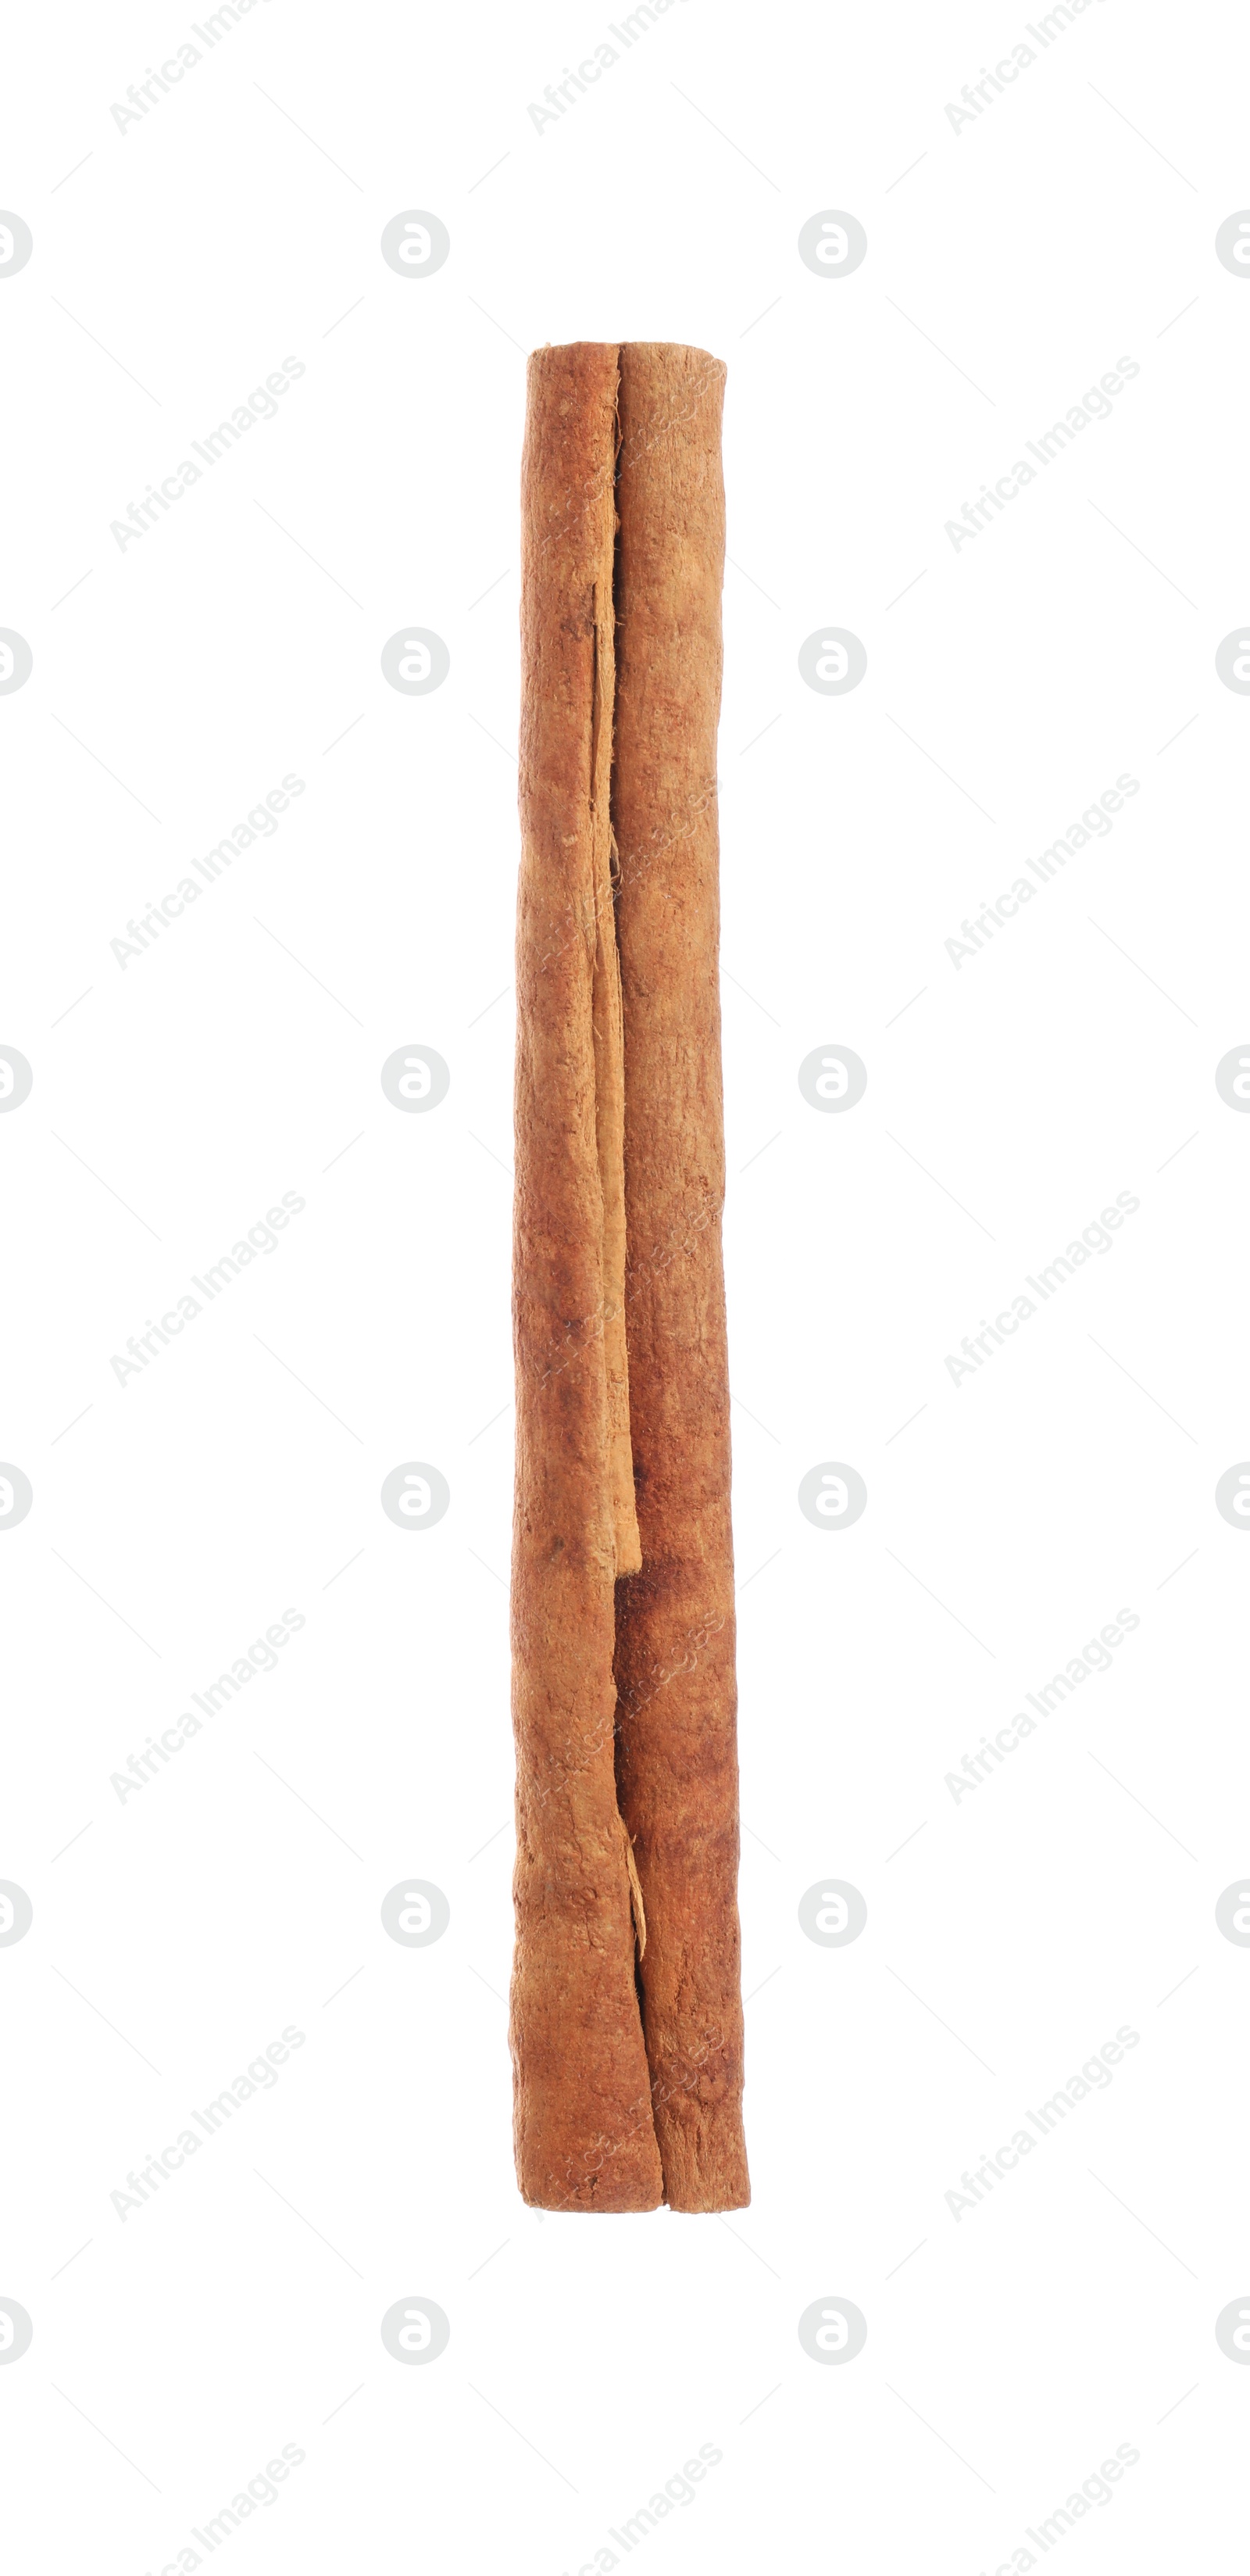 Photo of Dry aromatic cinnamon stick isolated on white